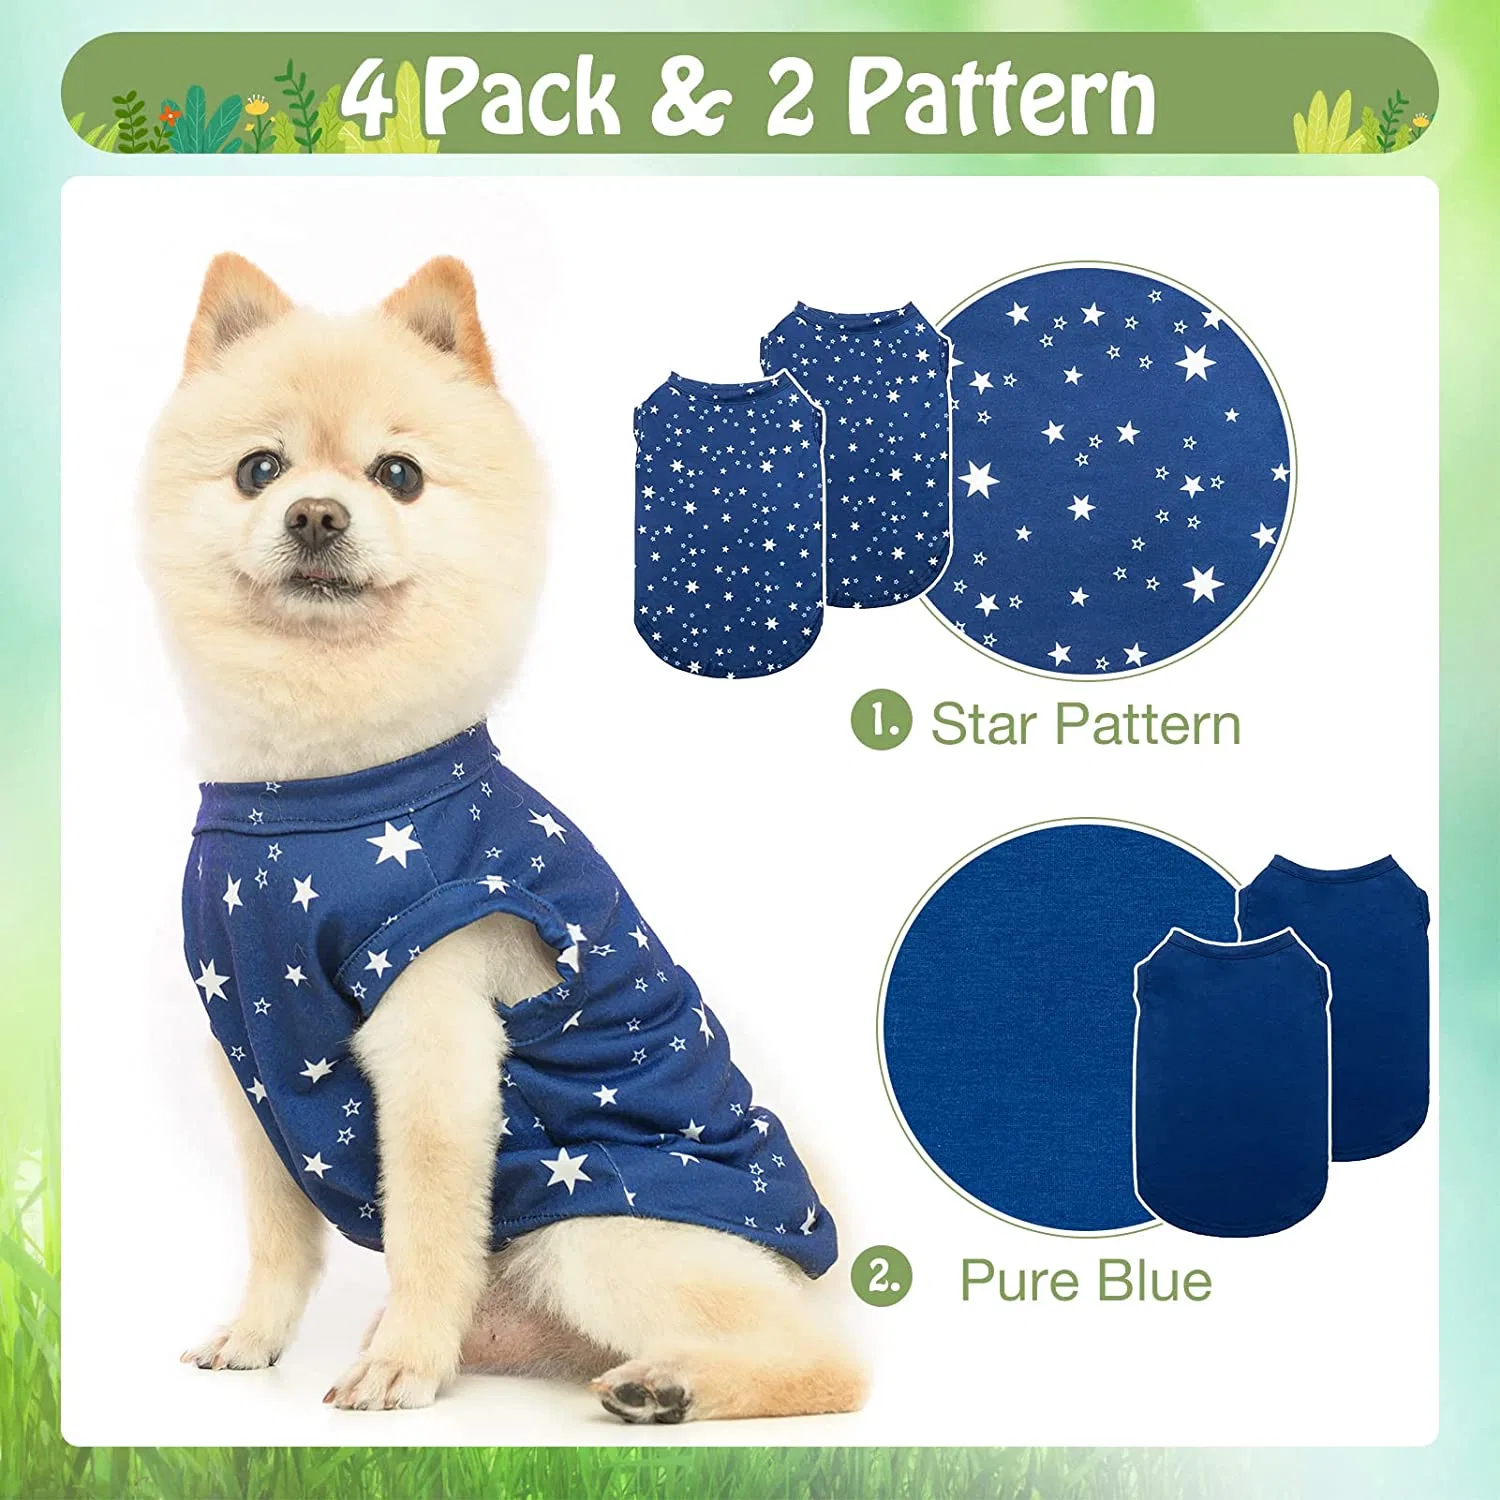 Luxury Soft Comfortable Cotton Shirt for Spring Summer Wearing to Matching Dog and Owner Clothes